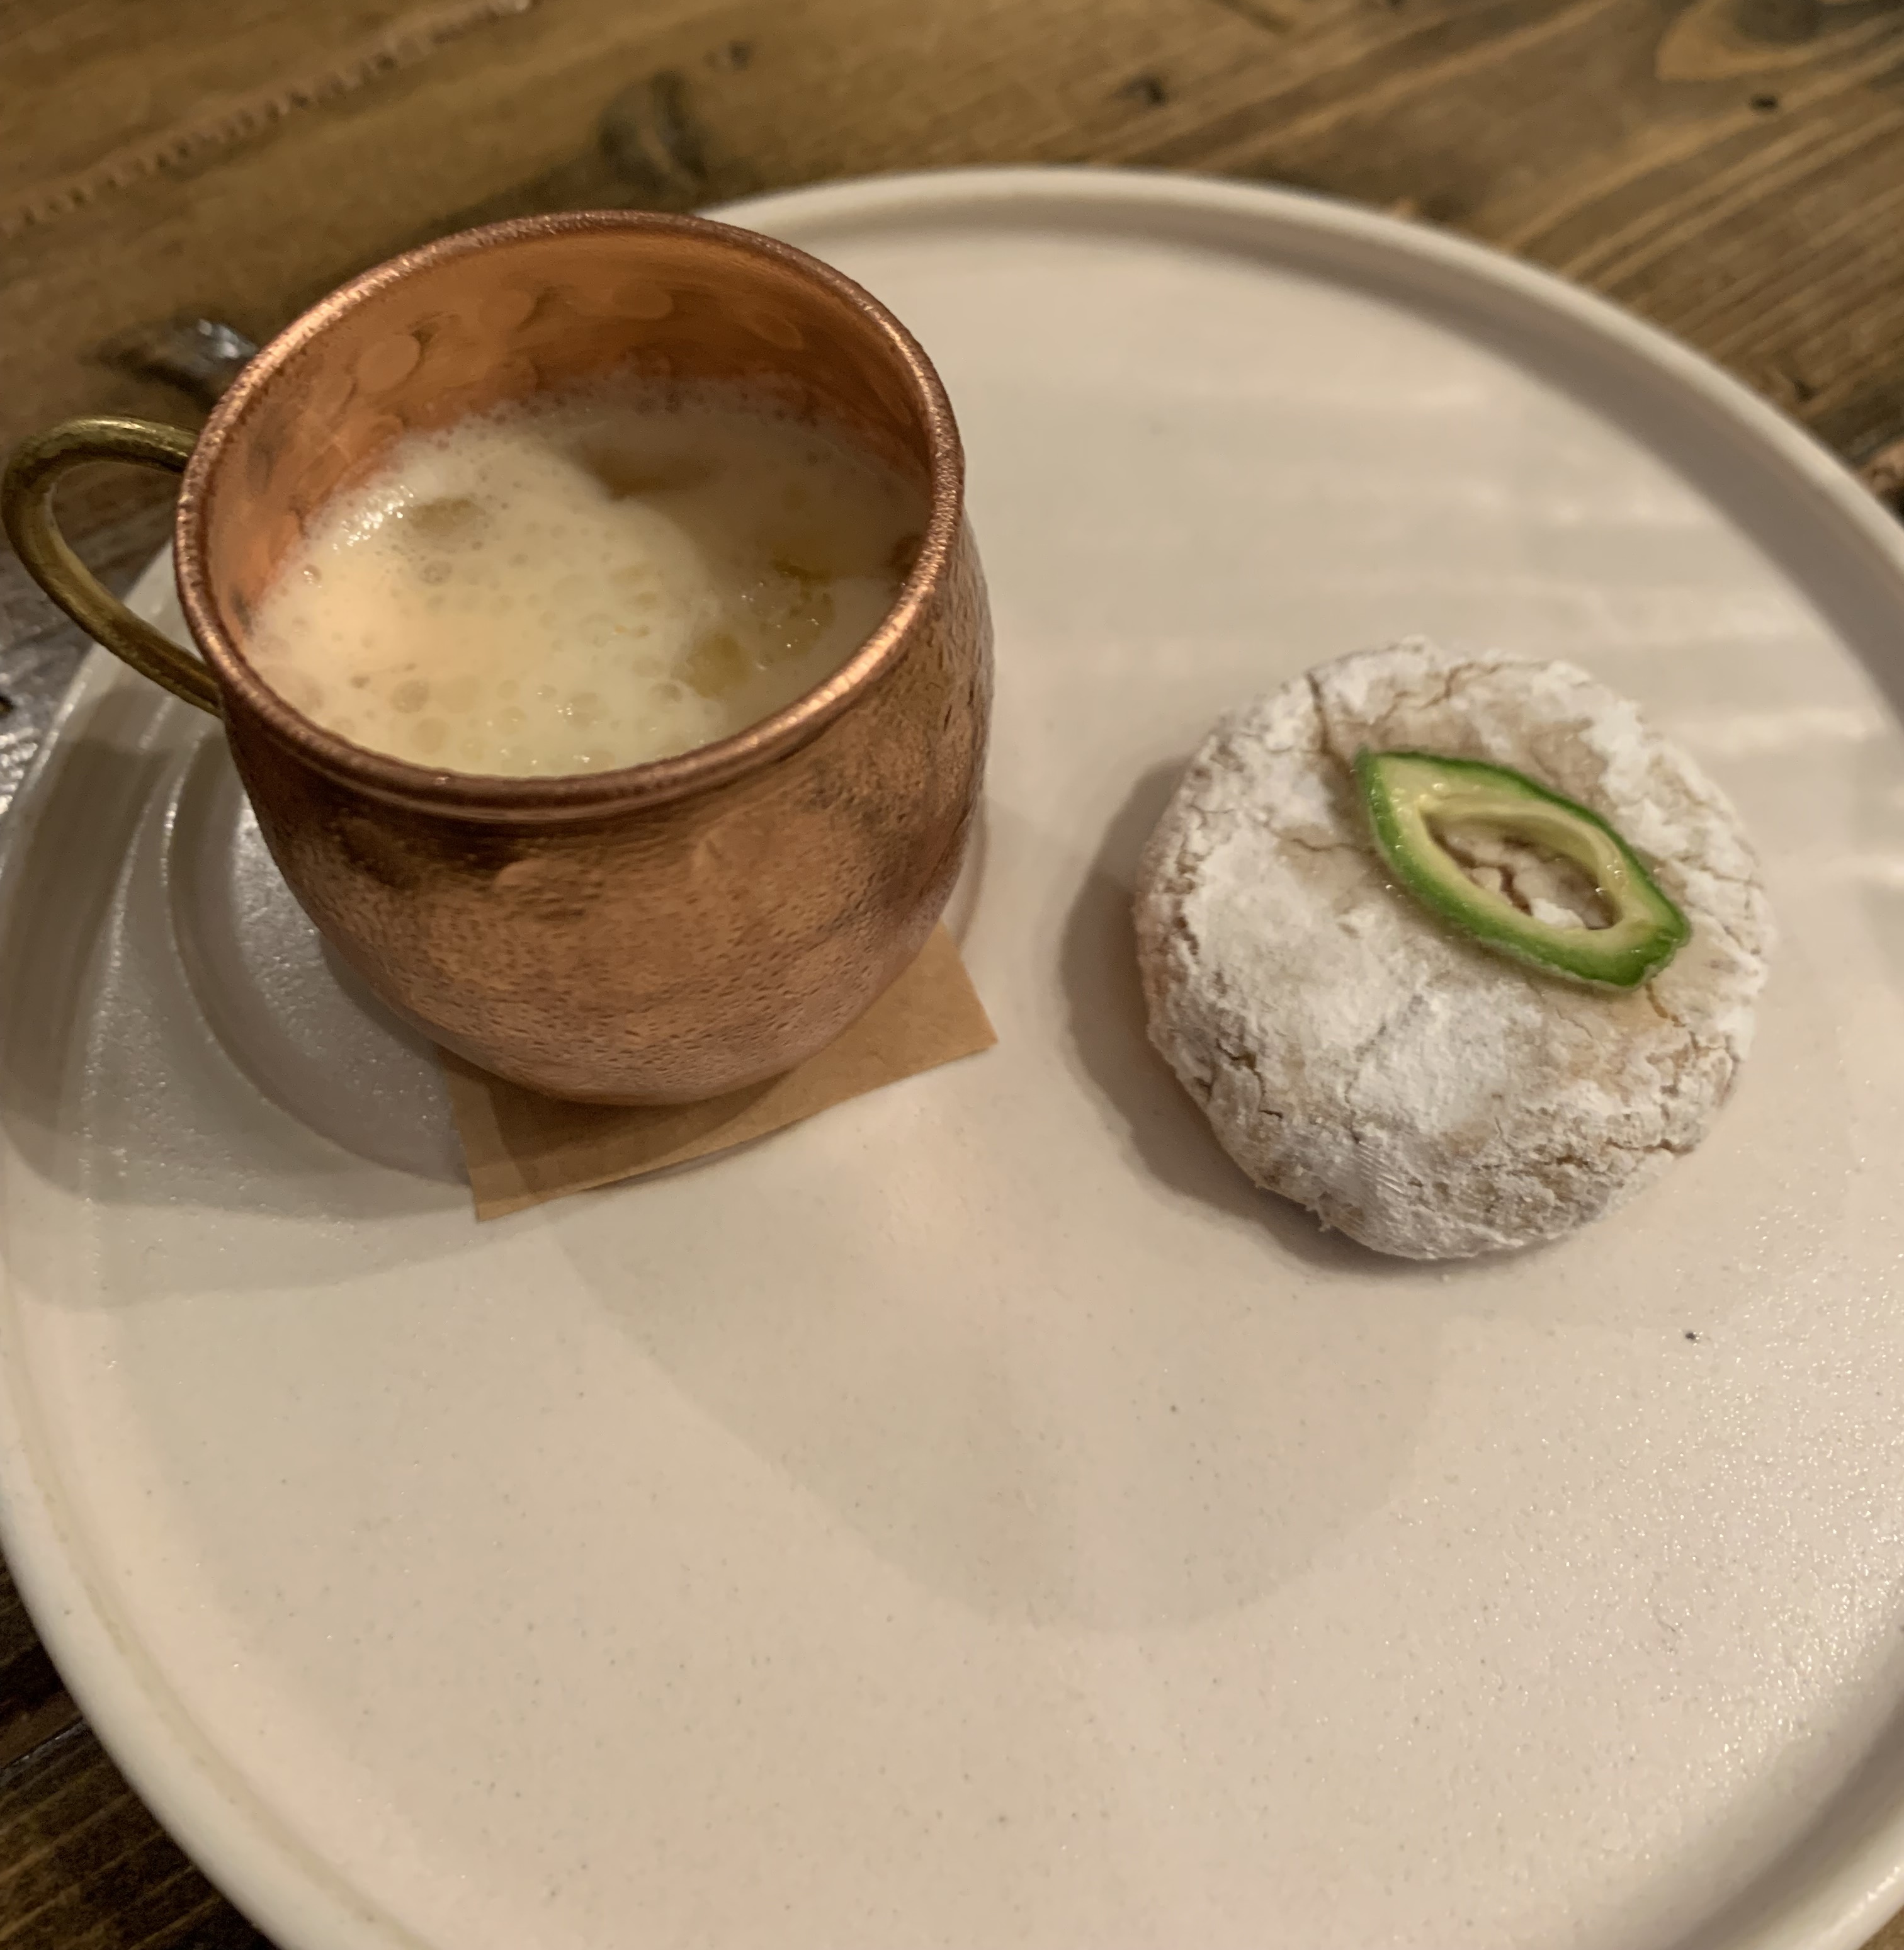 A plate with a tiny, hammered-copper cup with an orange-tinted milk and tiny ice cubes. Next to it is a cookie covered in white powder, with a single slice of a green almond on top.